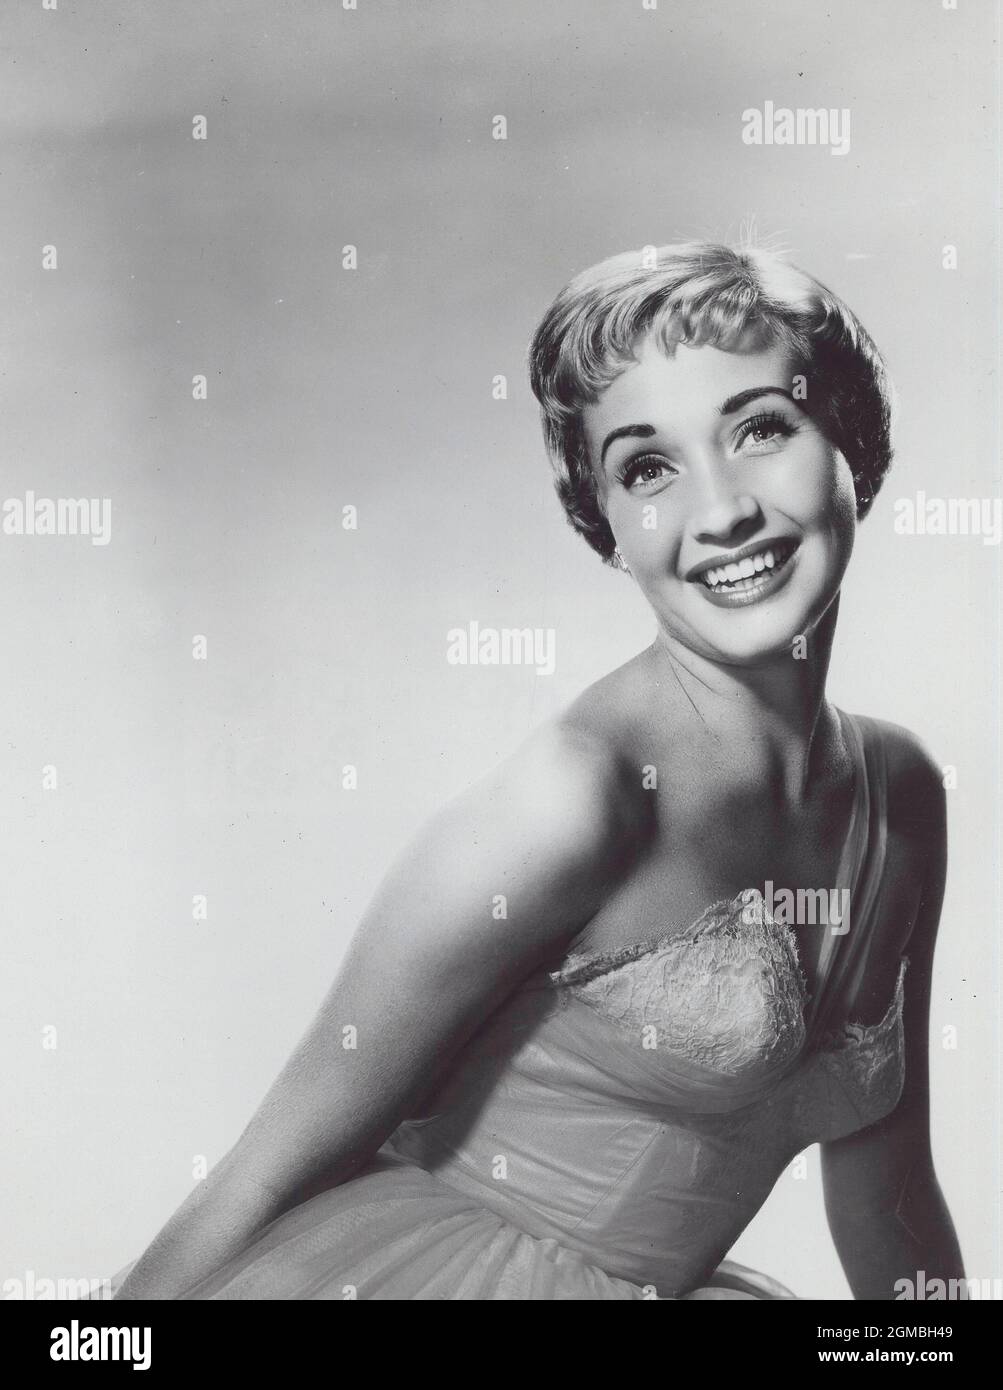 September 17, 2021: Actress JANE POWELL, the star of some of Hollywood's best-loved Golden Age musicals, has died at the age of 92. Powell died Thursday at her home in Wilton, Connecticut, her friend Susan Granger told CNN on Friday. A megastar of musical films of the 1940s and '50s, Powell's hits included 'Seven Brides for Seven Brothers' opposite Howard Keel, and 'Royal Wedding,' in which she starred alongside F. Astaire. pictured circa 1950's. (Credit Image: © Smp/ZUMA Wire) Stock Photo